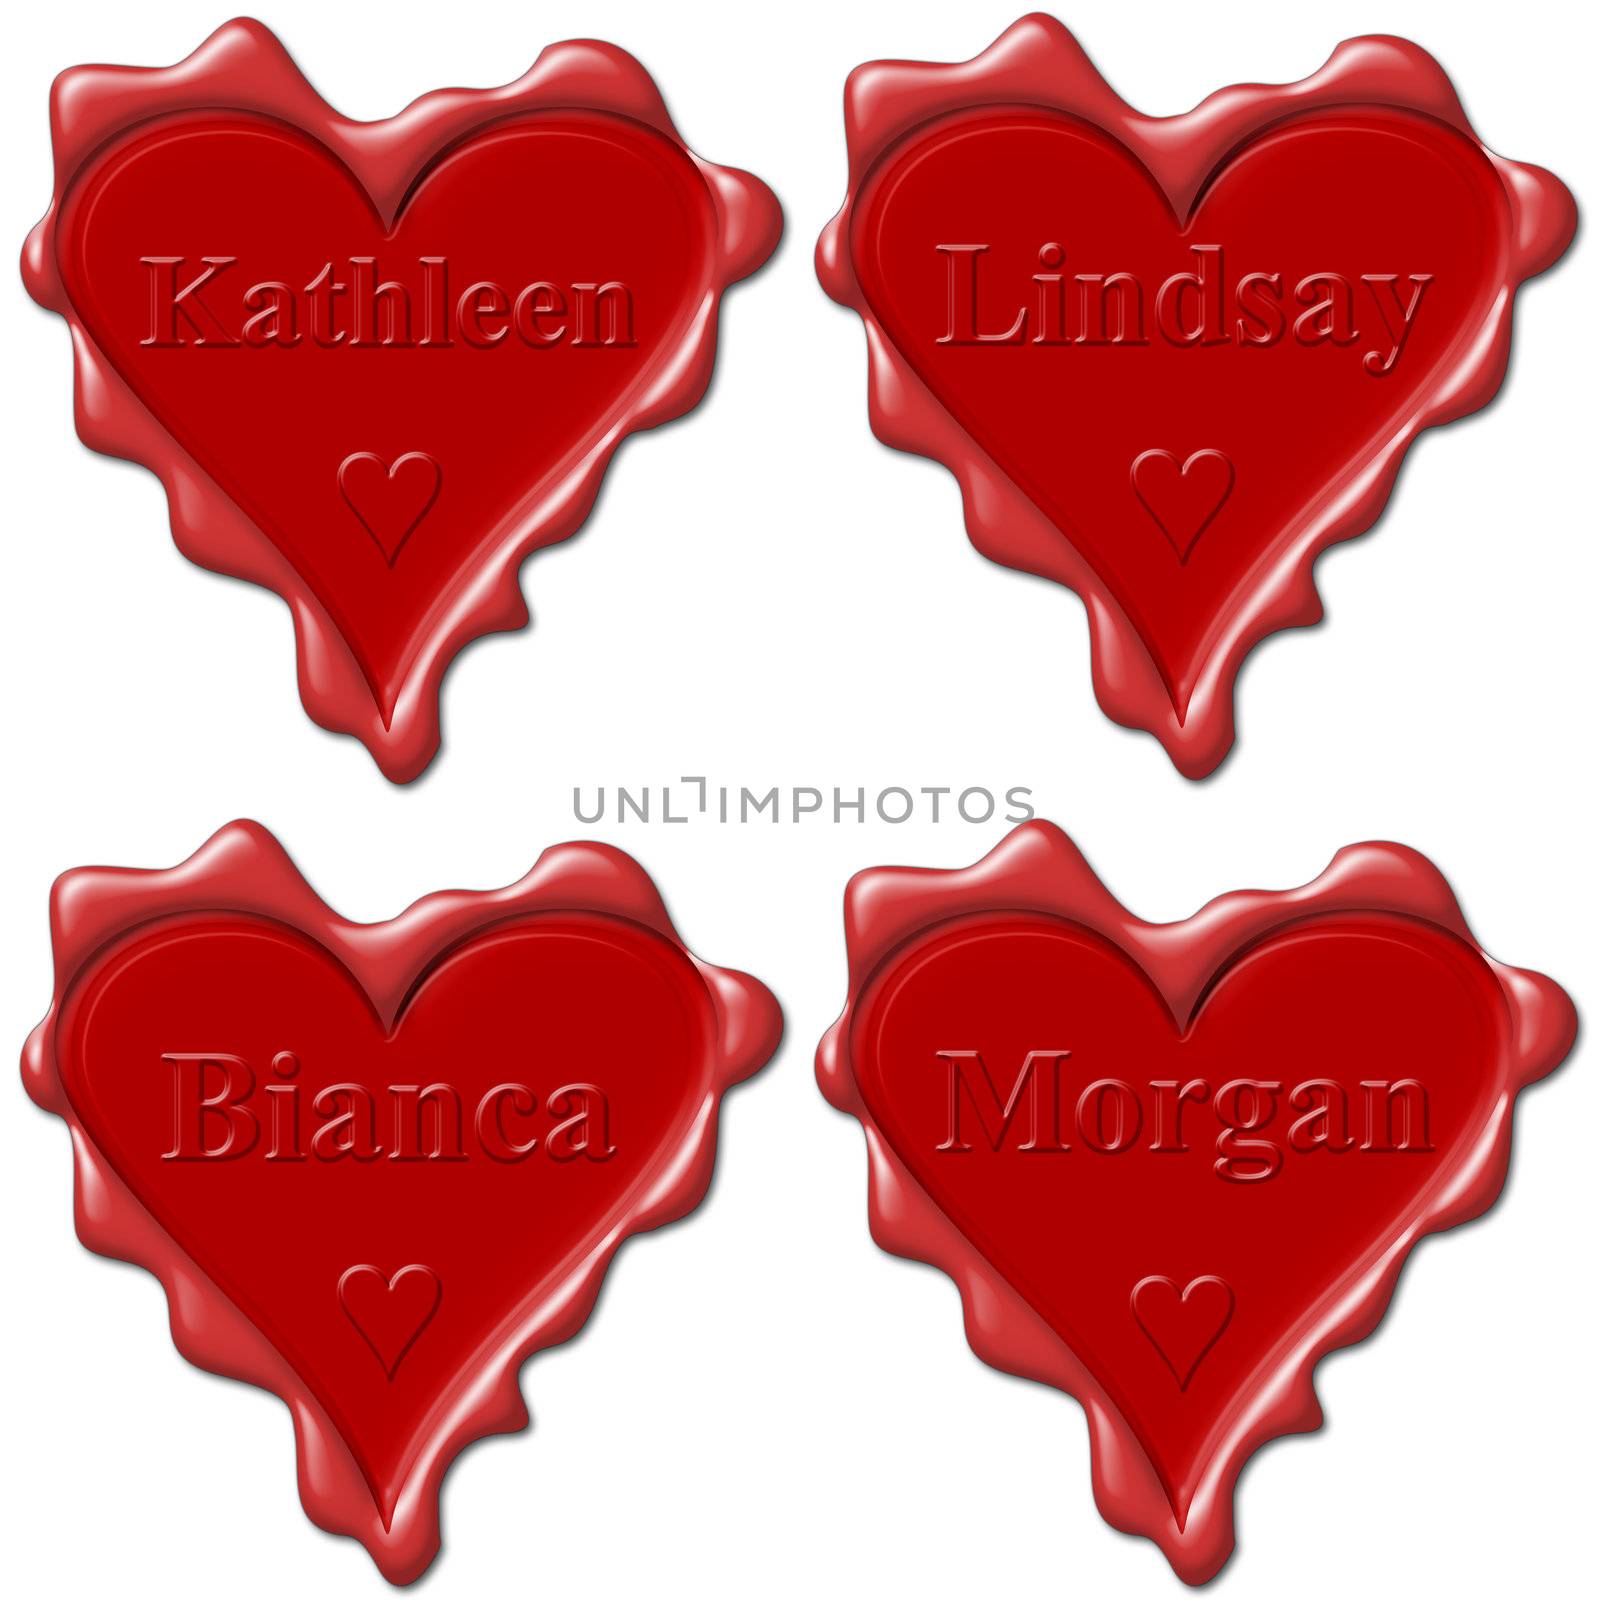 Valentine love hearts with names: Kathleen, Linsday, Bianca, Morgan